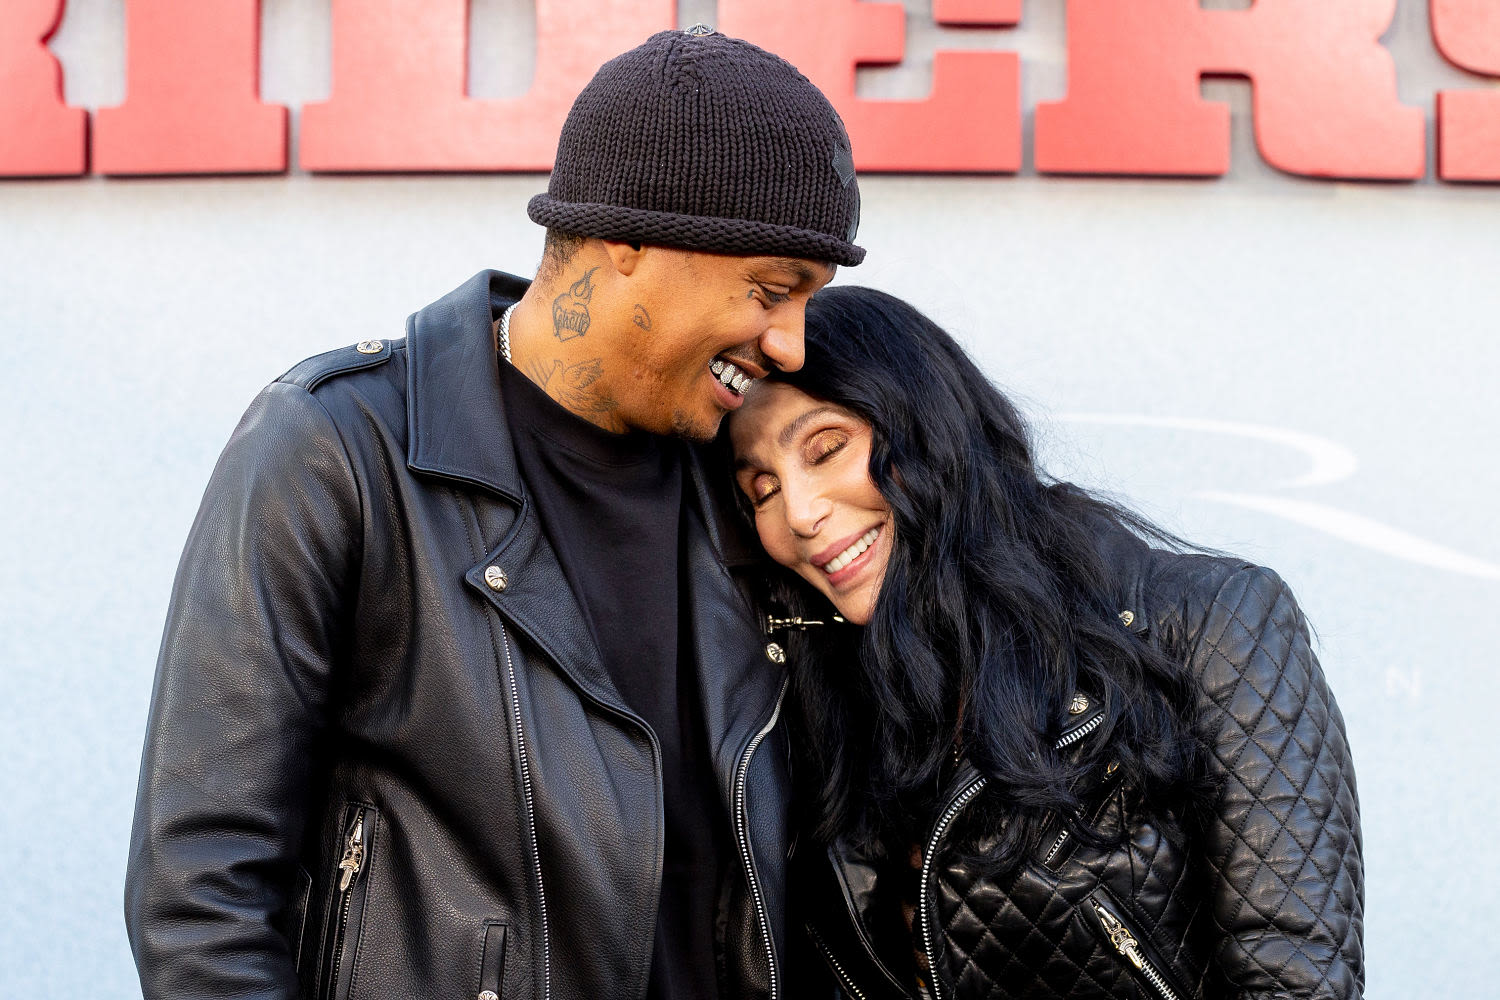 Cher and boyfriend Alexander 'AE' Edwards step out in outfits she picked